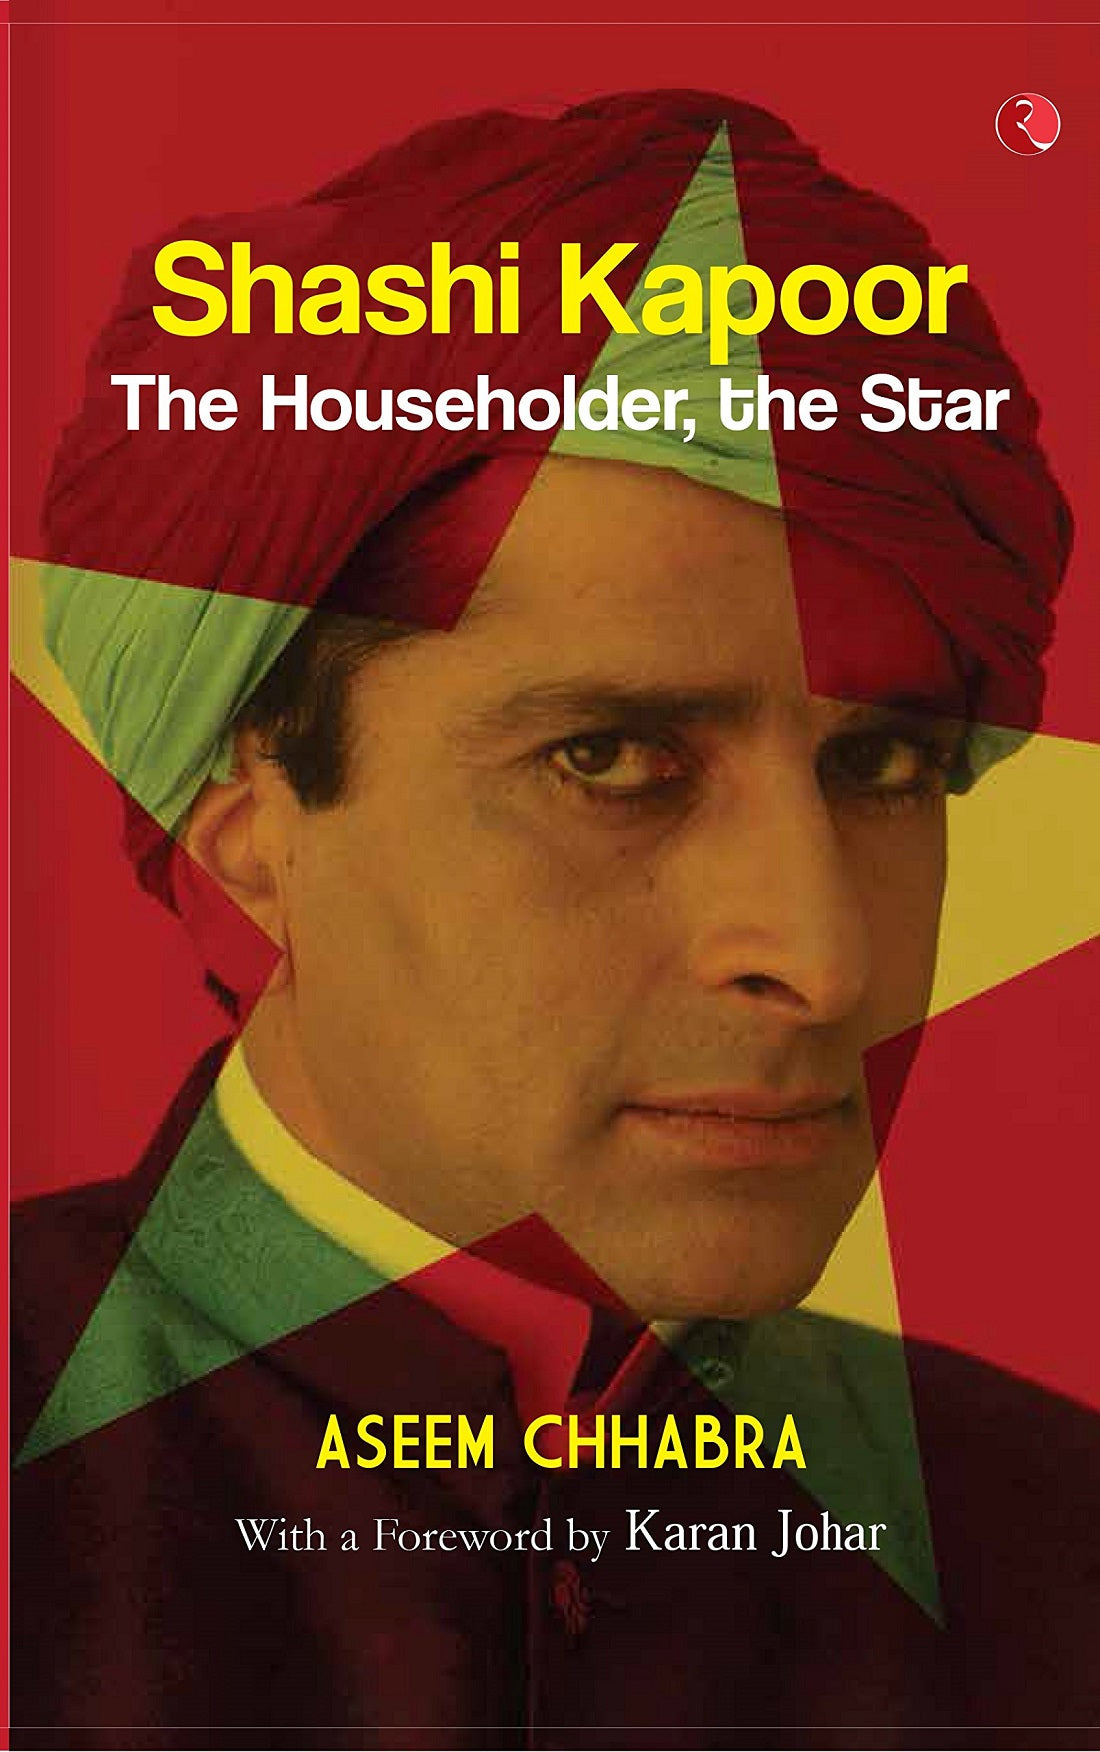 SHASHI KAPOOR THE HOUSEHOLD, THE STAR